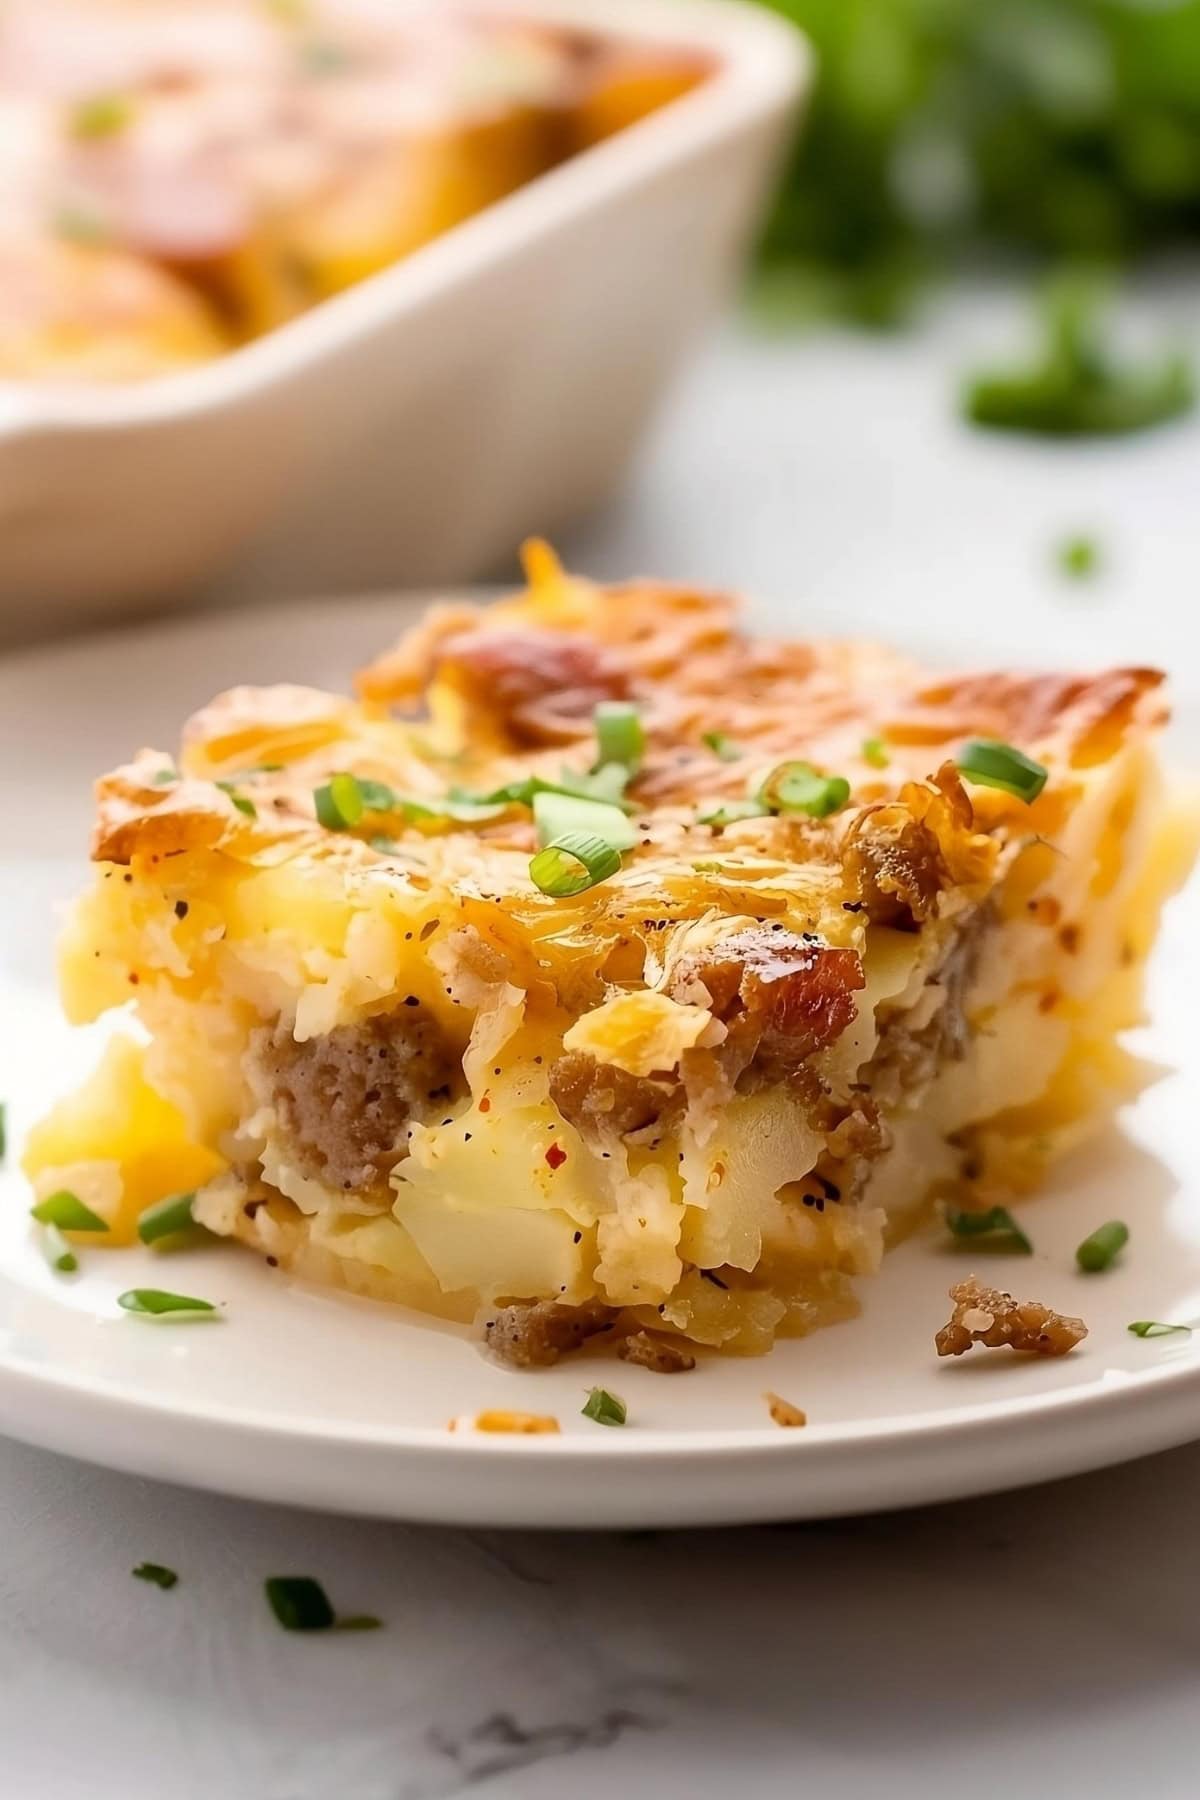 Slice of sausage hashbrown breakfast
casserole on a white plate.